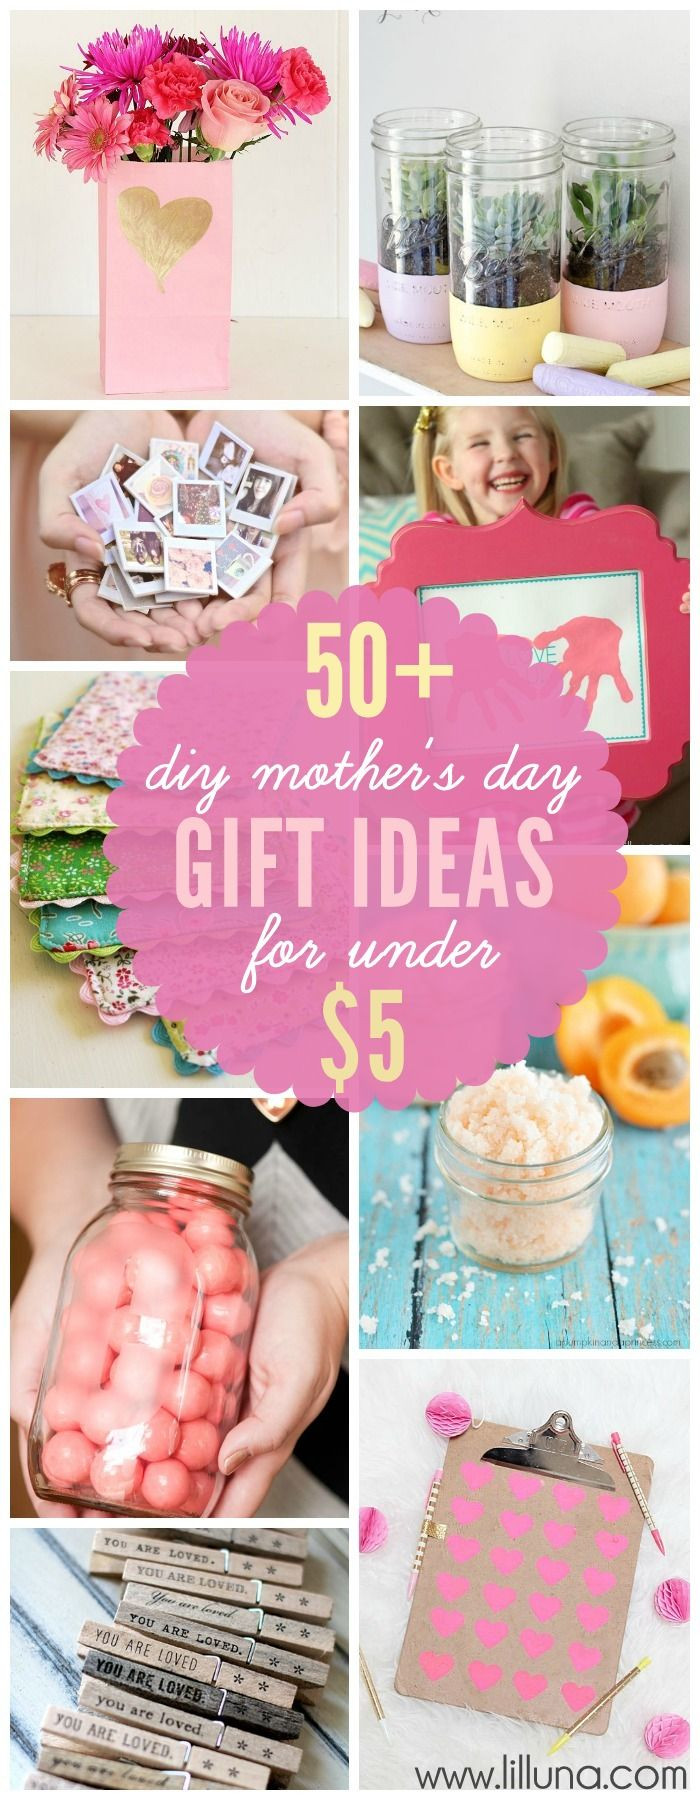 Wife Mothers Day Gift Ideas
 BEST Homemade Mothers Day Gifts so many great ideas